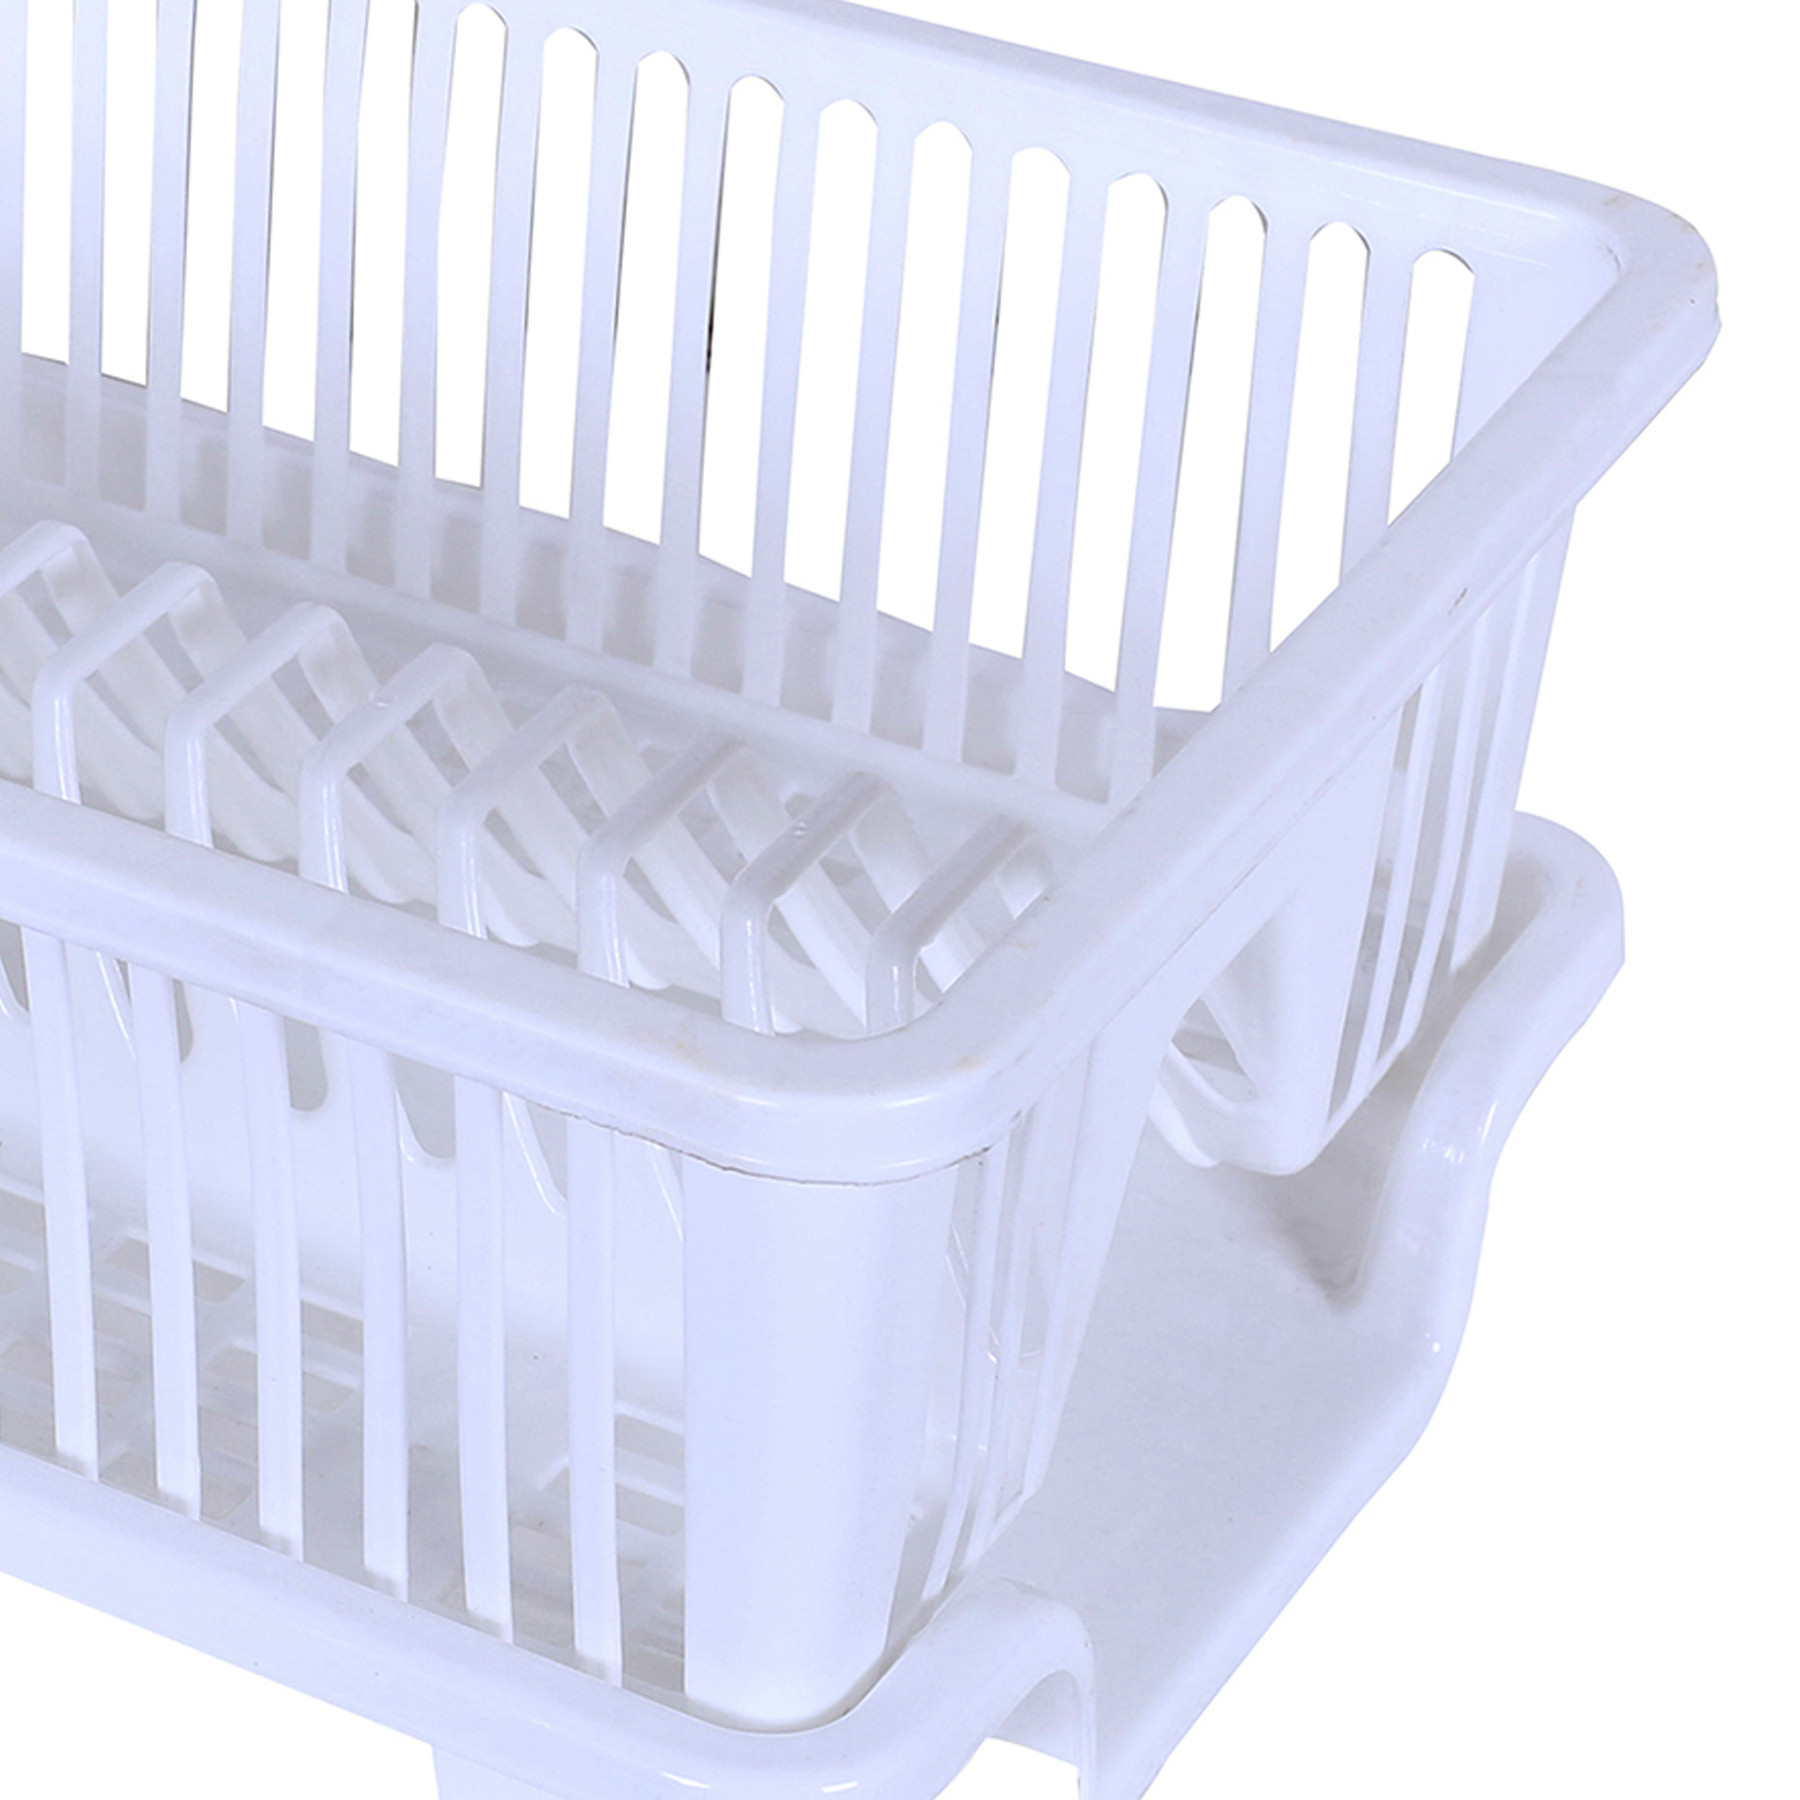 Kuber Industries Dish Drainer | Plastic Cutlery Holder | Drying Basket with Tray | Dish Drying Rack for Kitchen Utensils | Bartan Stand for Kitchen | Drying Tray | White